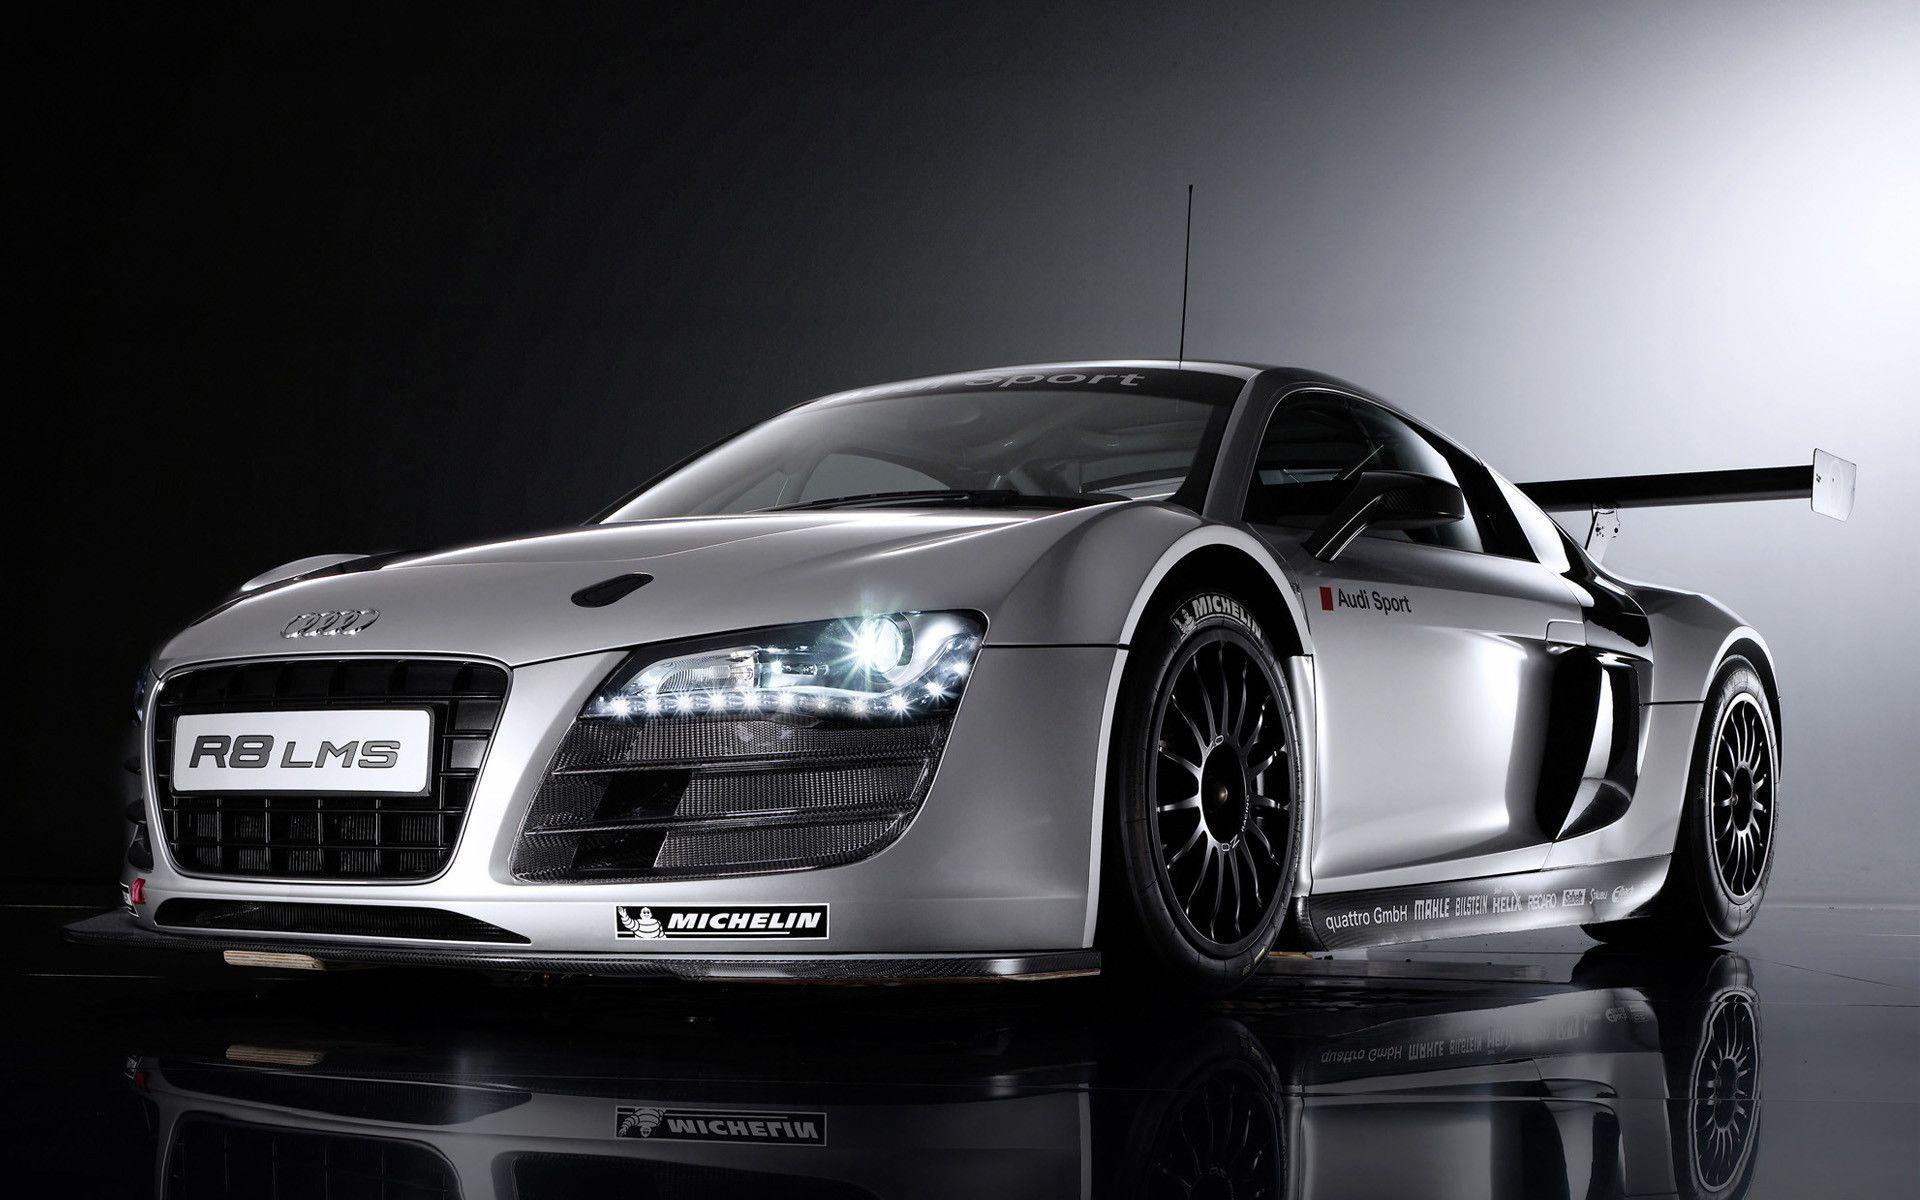 Wallpapers For > Audi R8 Wallpapers Hd Widescreen